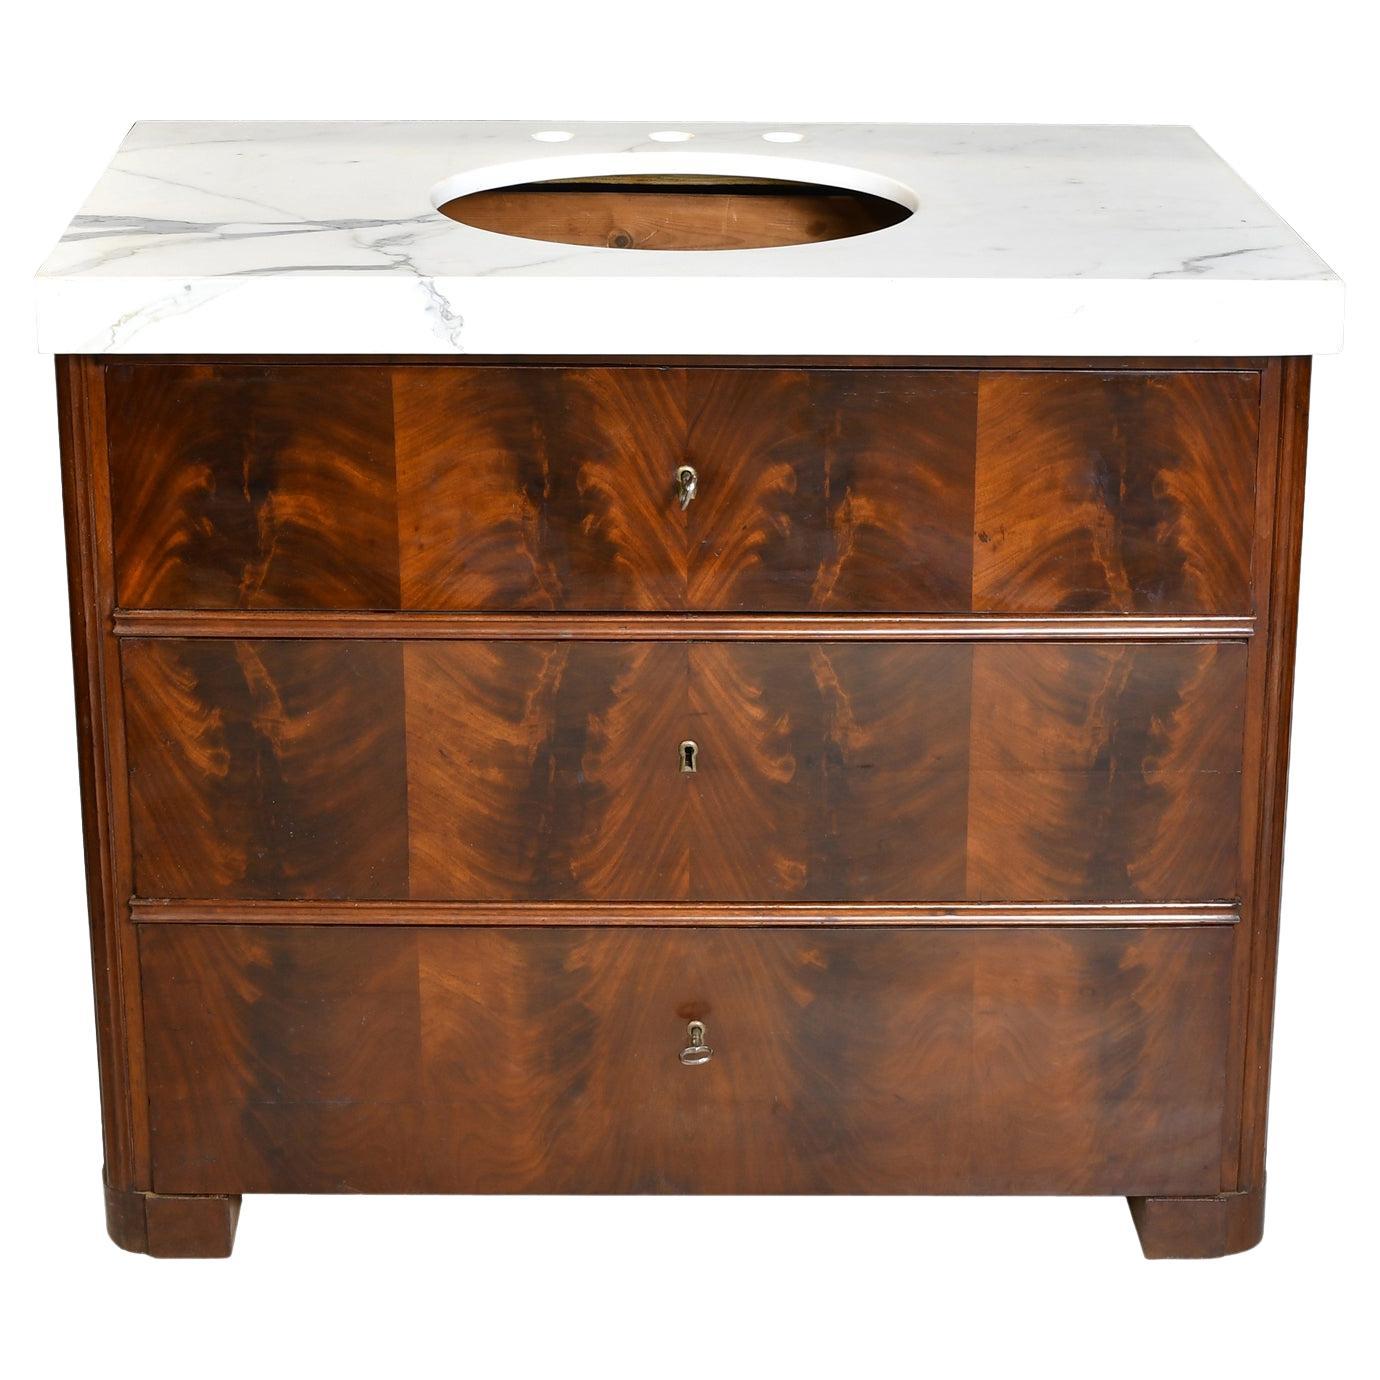 Antique Swedish Mahogany Chest Adapted as Vanity with Calacatta Gold Marble Top